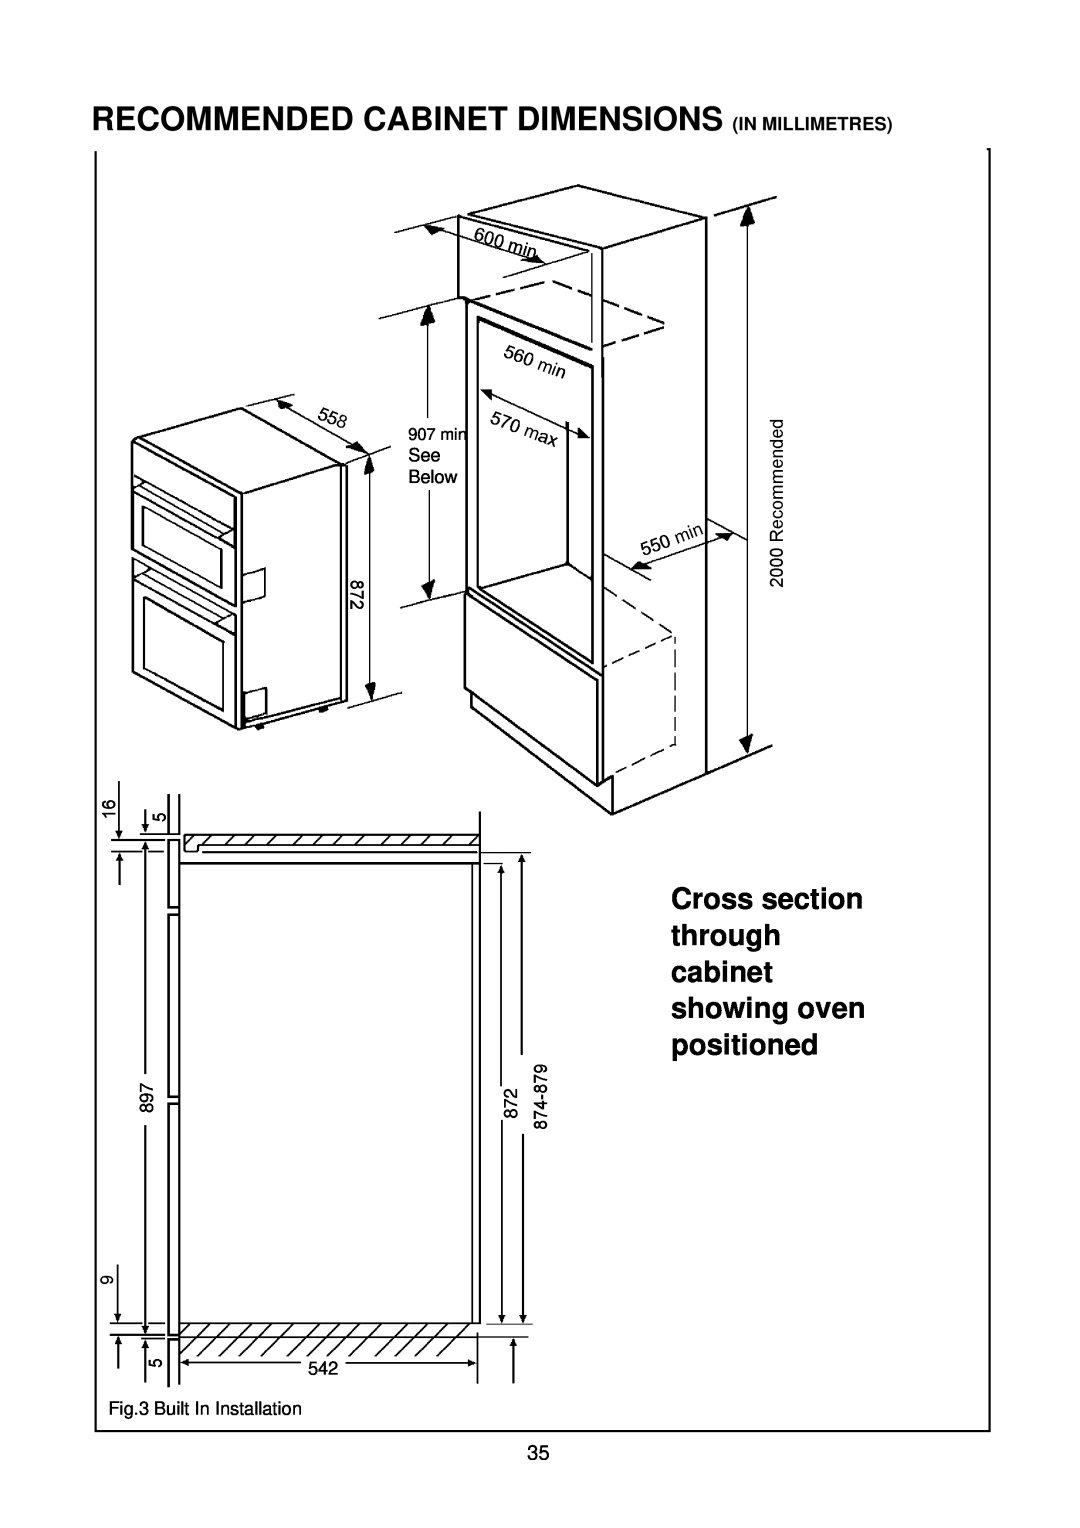 Electrolux D2160 installation instructions Cross section, through, cabinet, showing oven, positioned, 907 min 